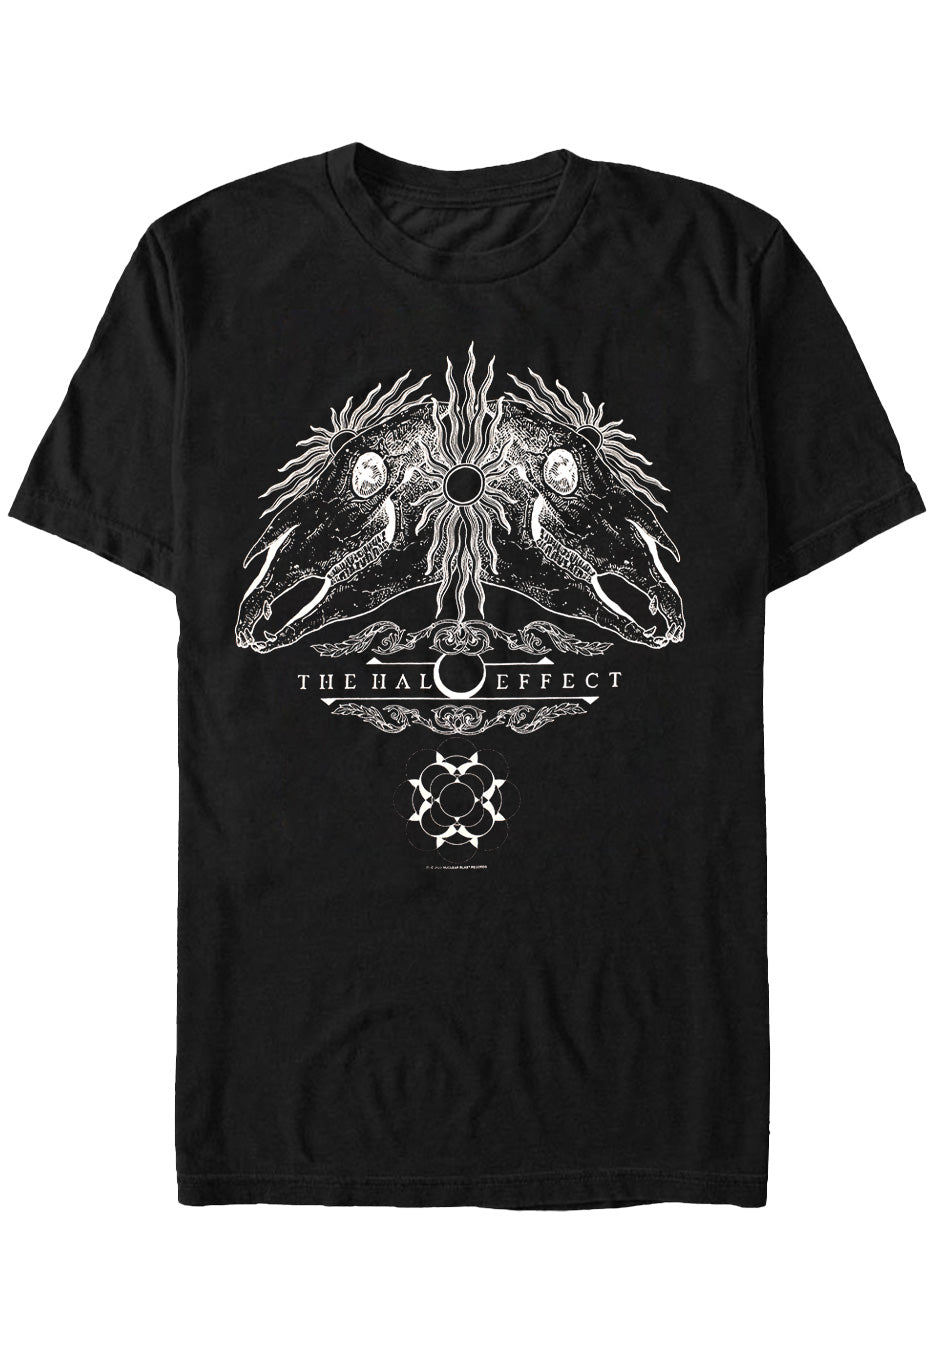 The Halo Effect - 666% - T-Shirt